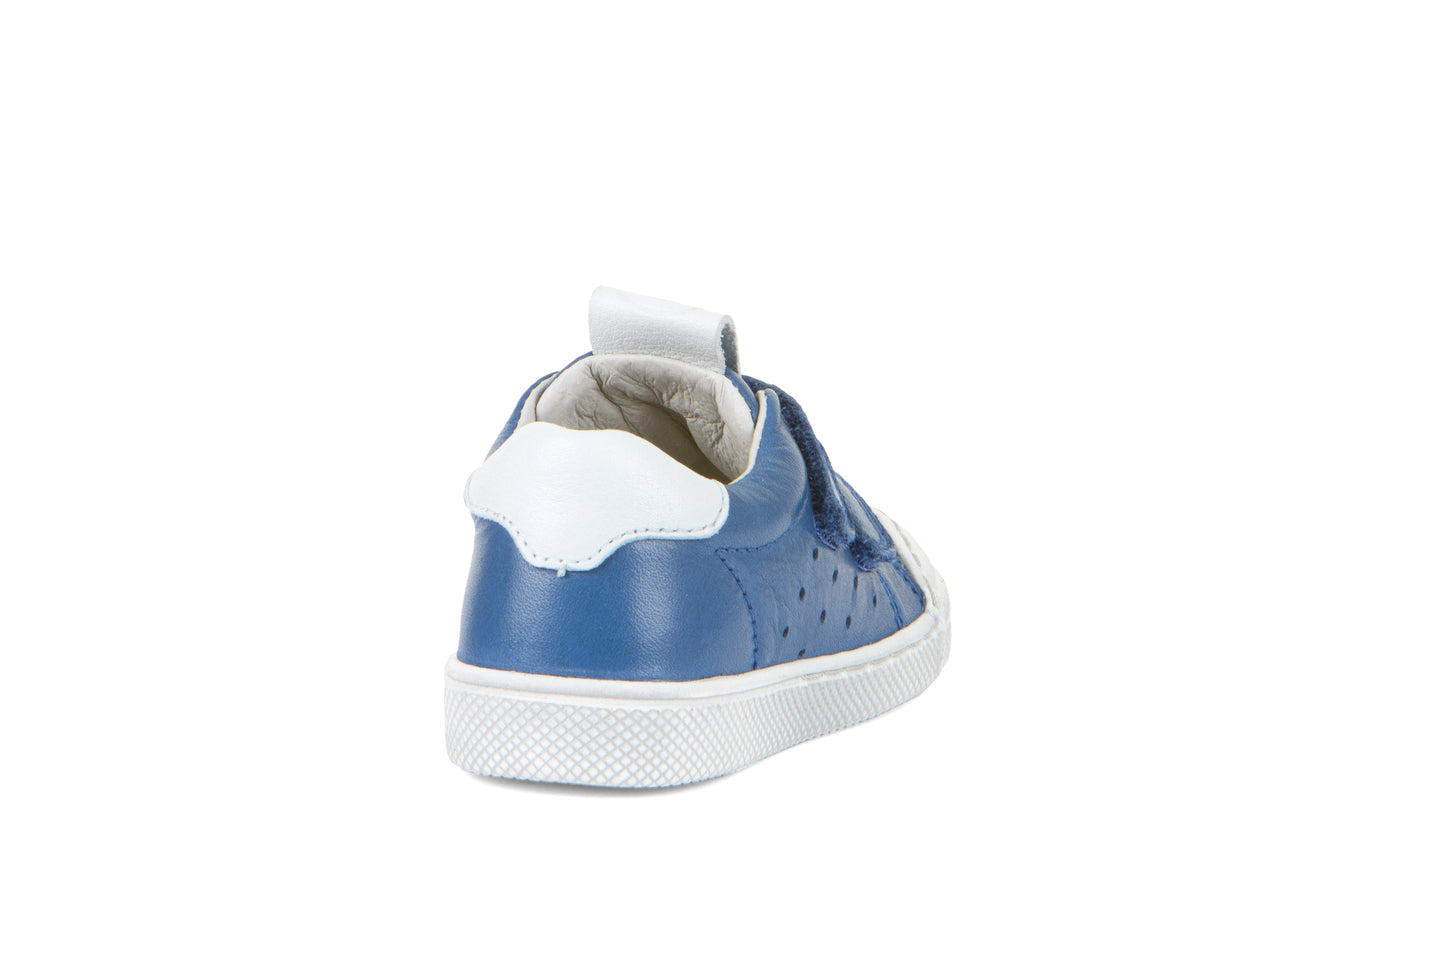 Blue Leather Sneaker Style Casual Shoe